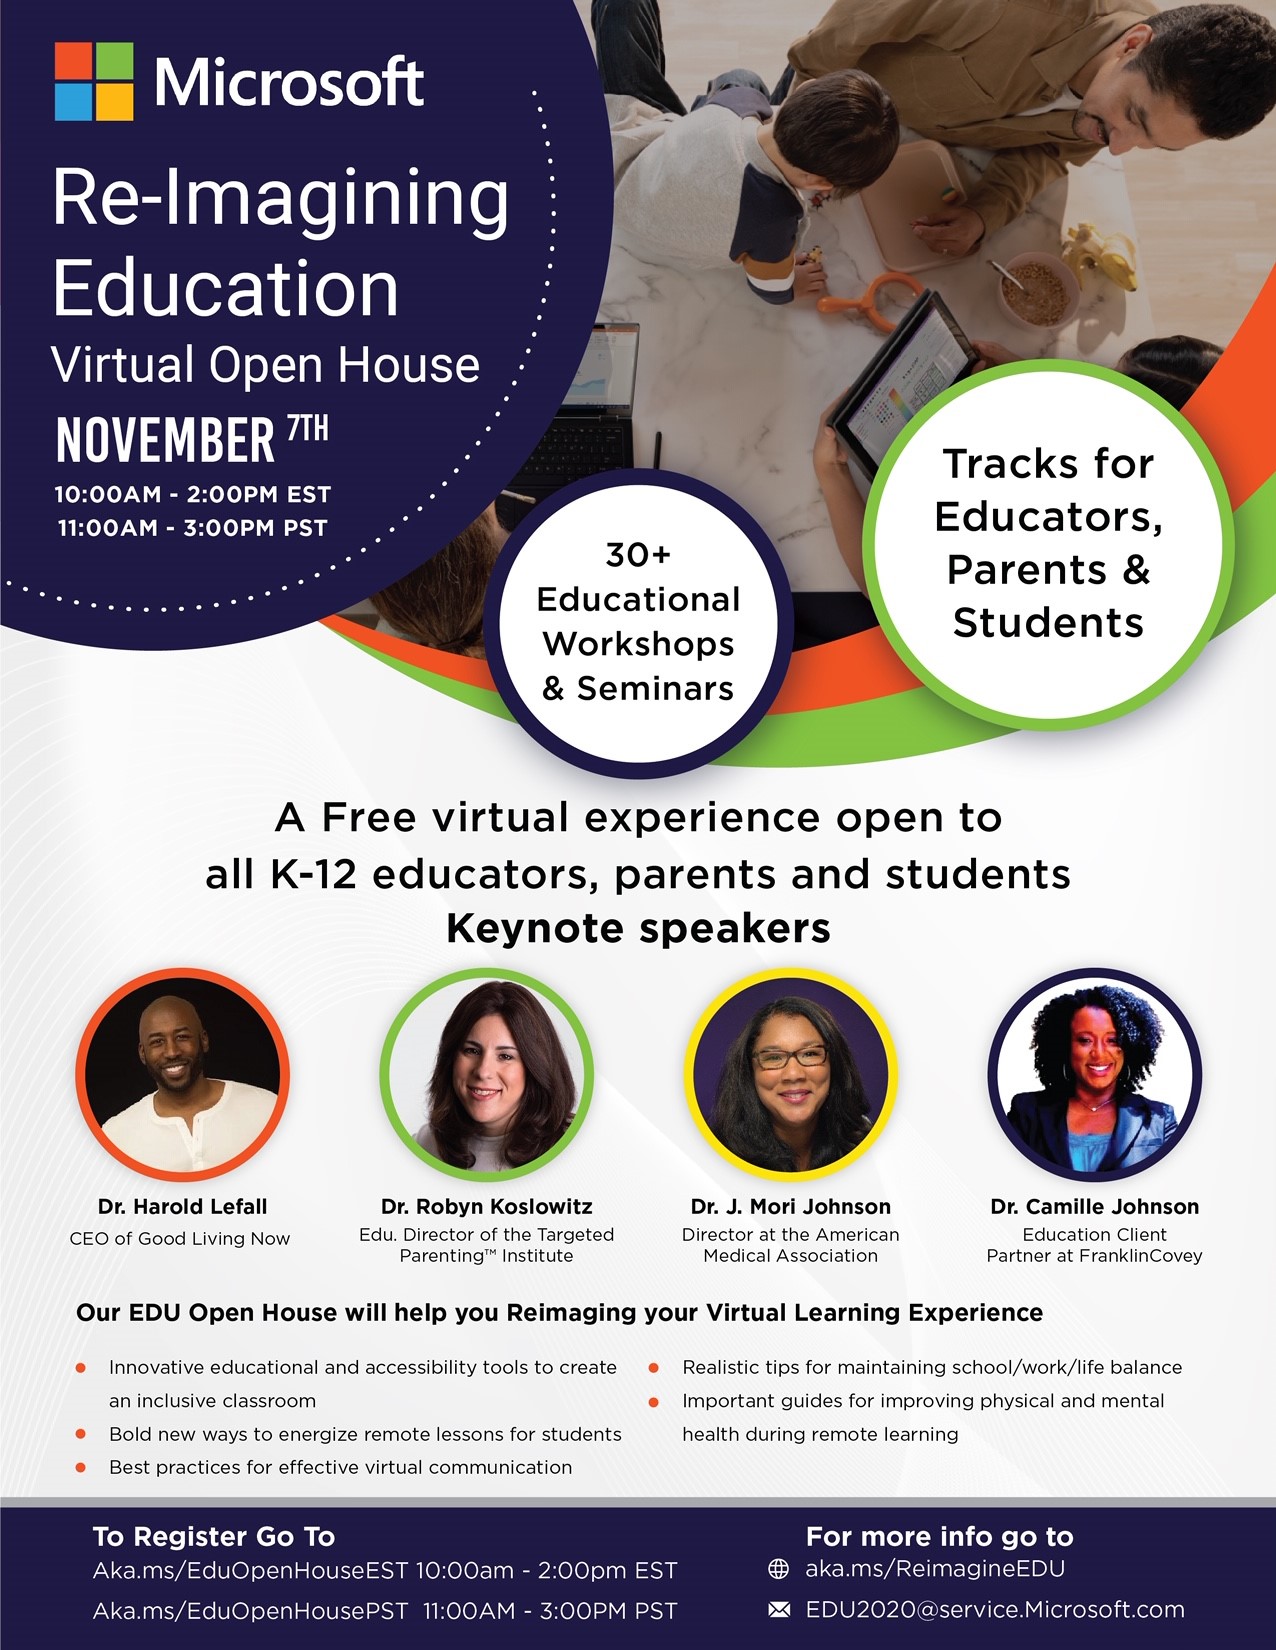 NABSE in partnership with Microsoft presents: Re-Imagining Education